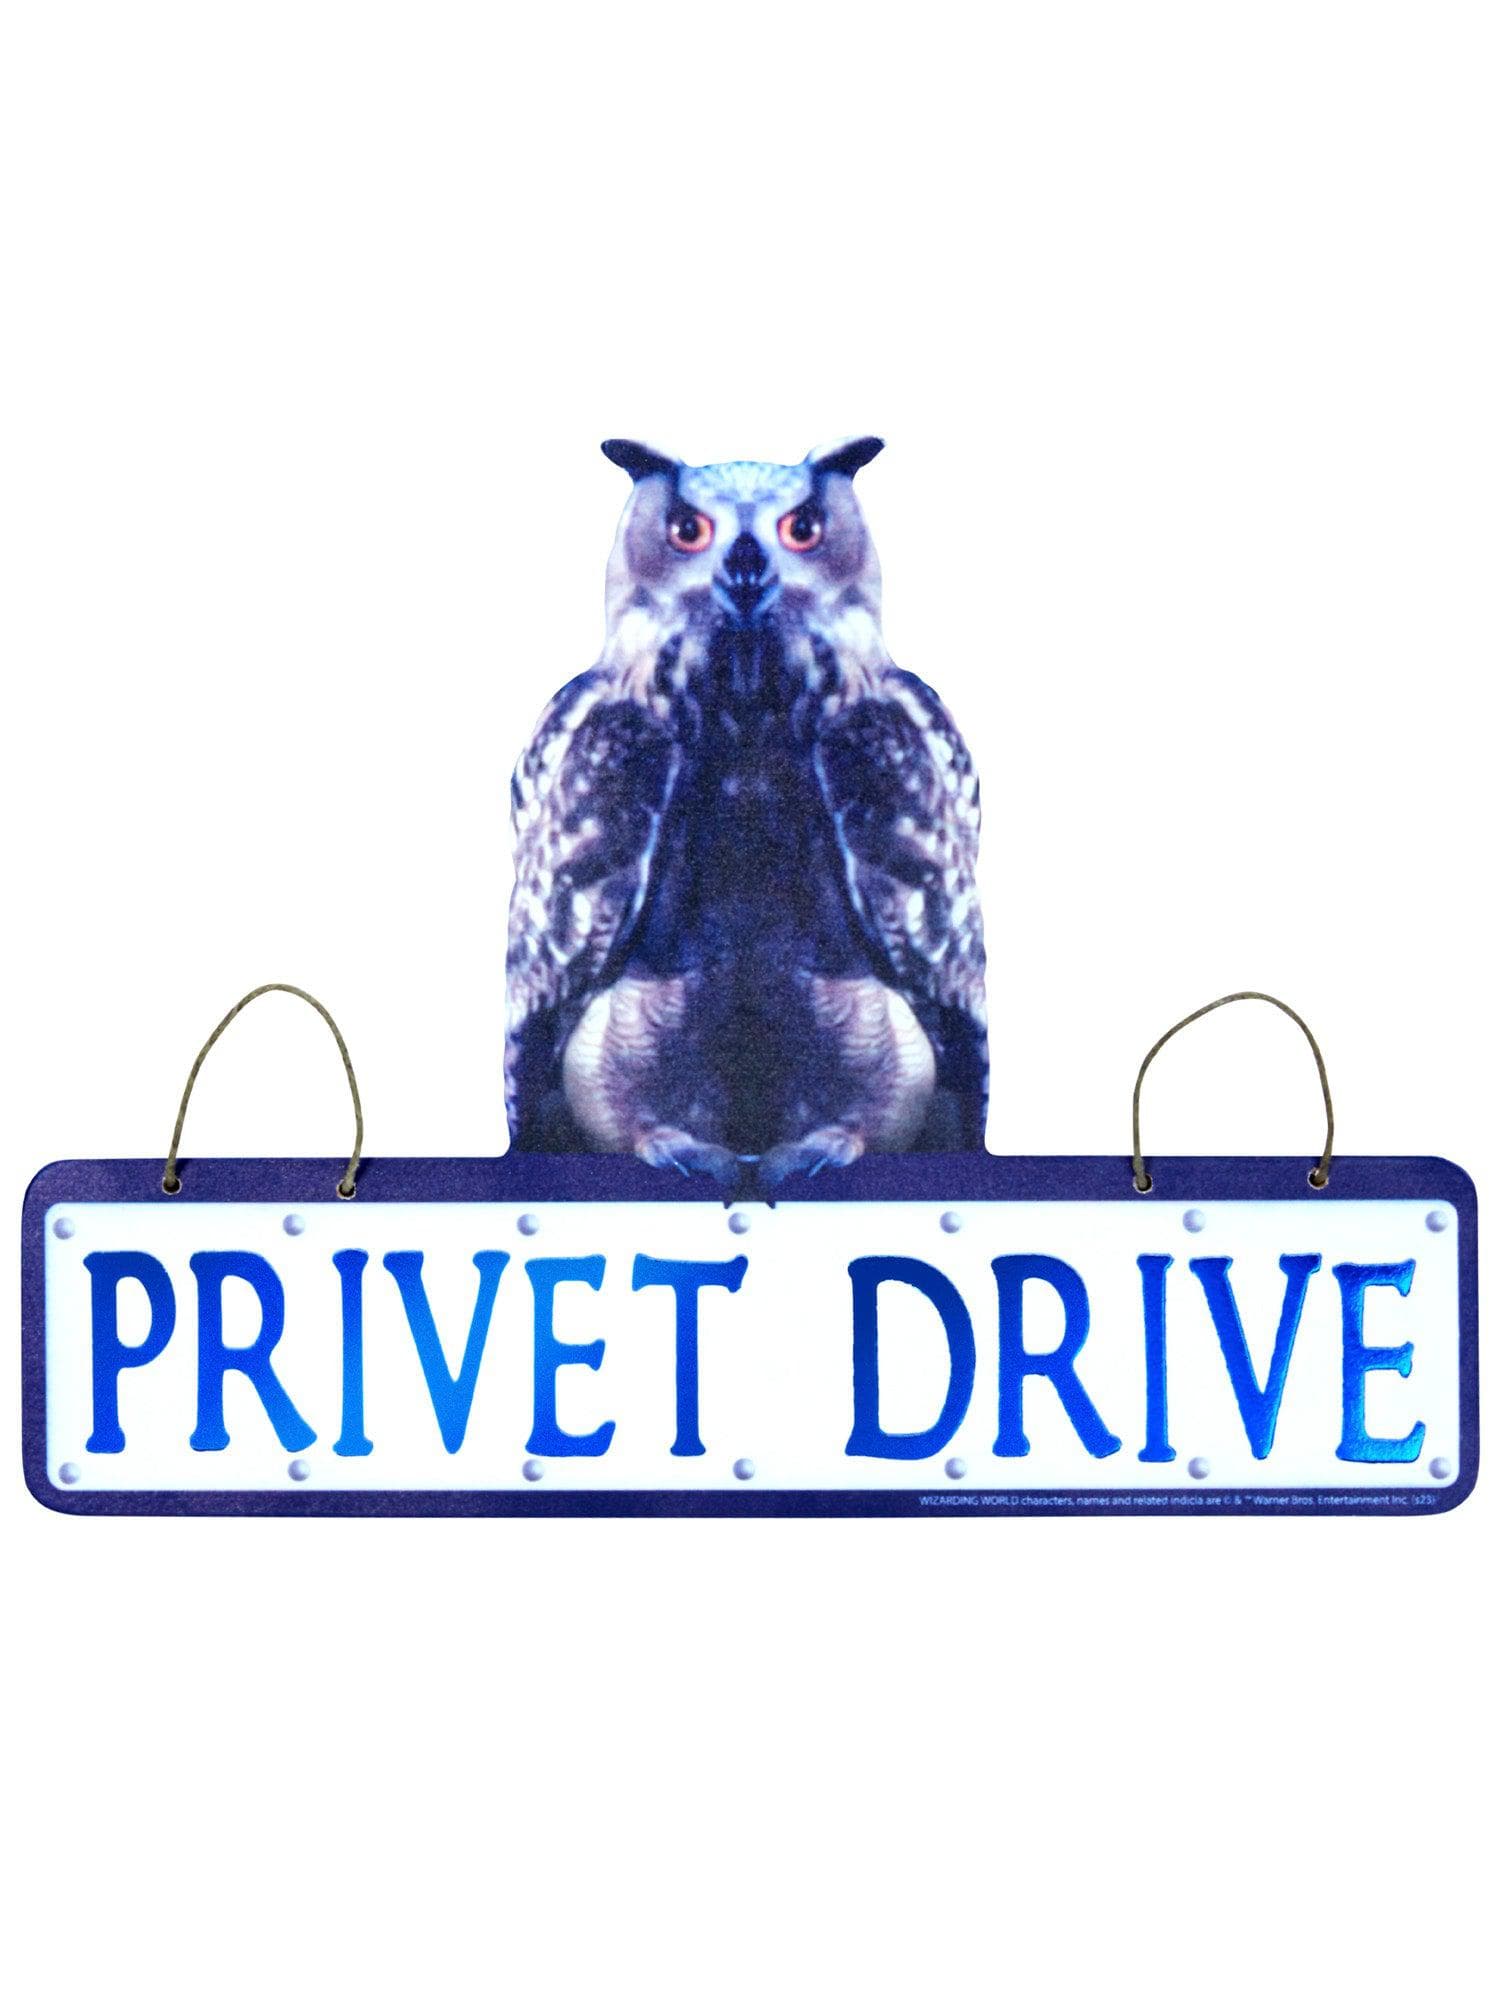 10-inch Harry Potter Privet Wall Sign Decoration - costumes.com